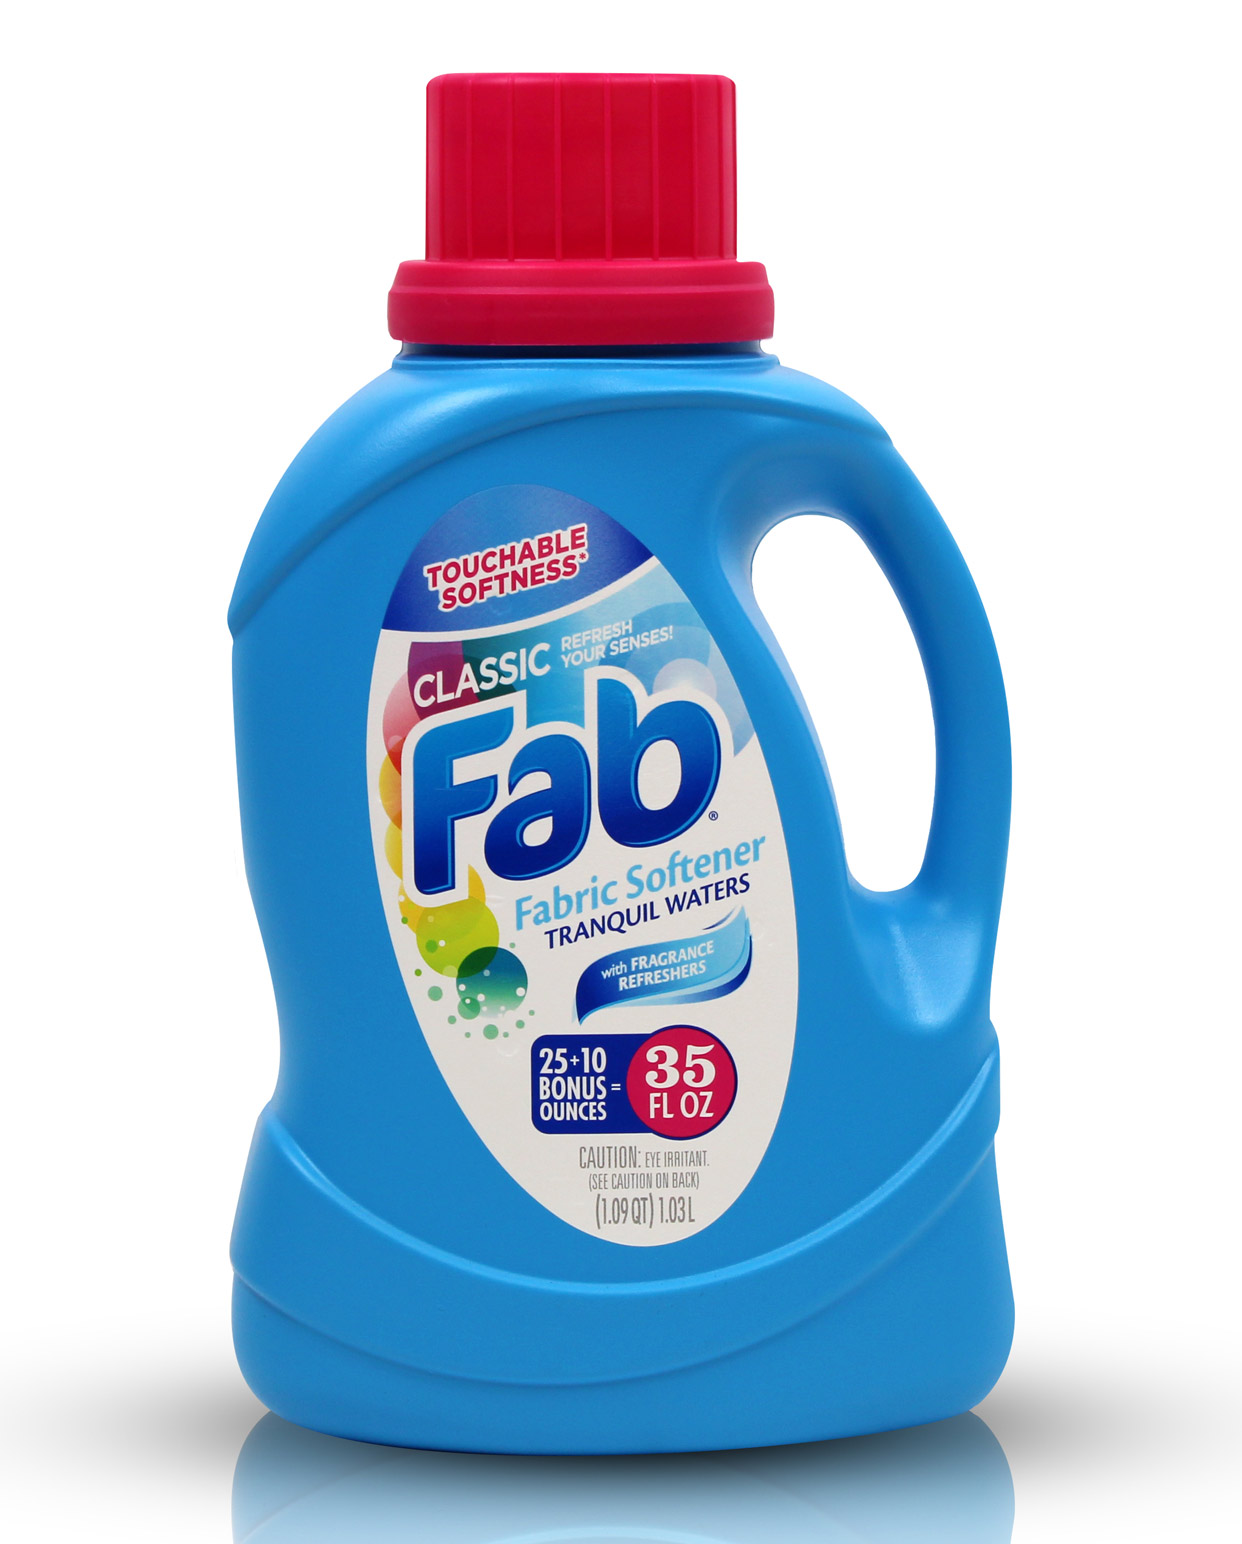 35oz bottle of Fab Best scented fabric softener Tranquil Waters